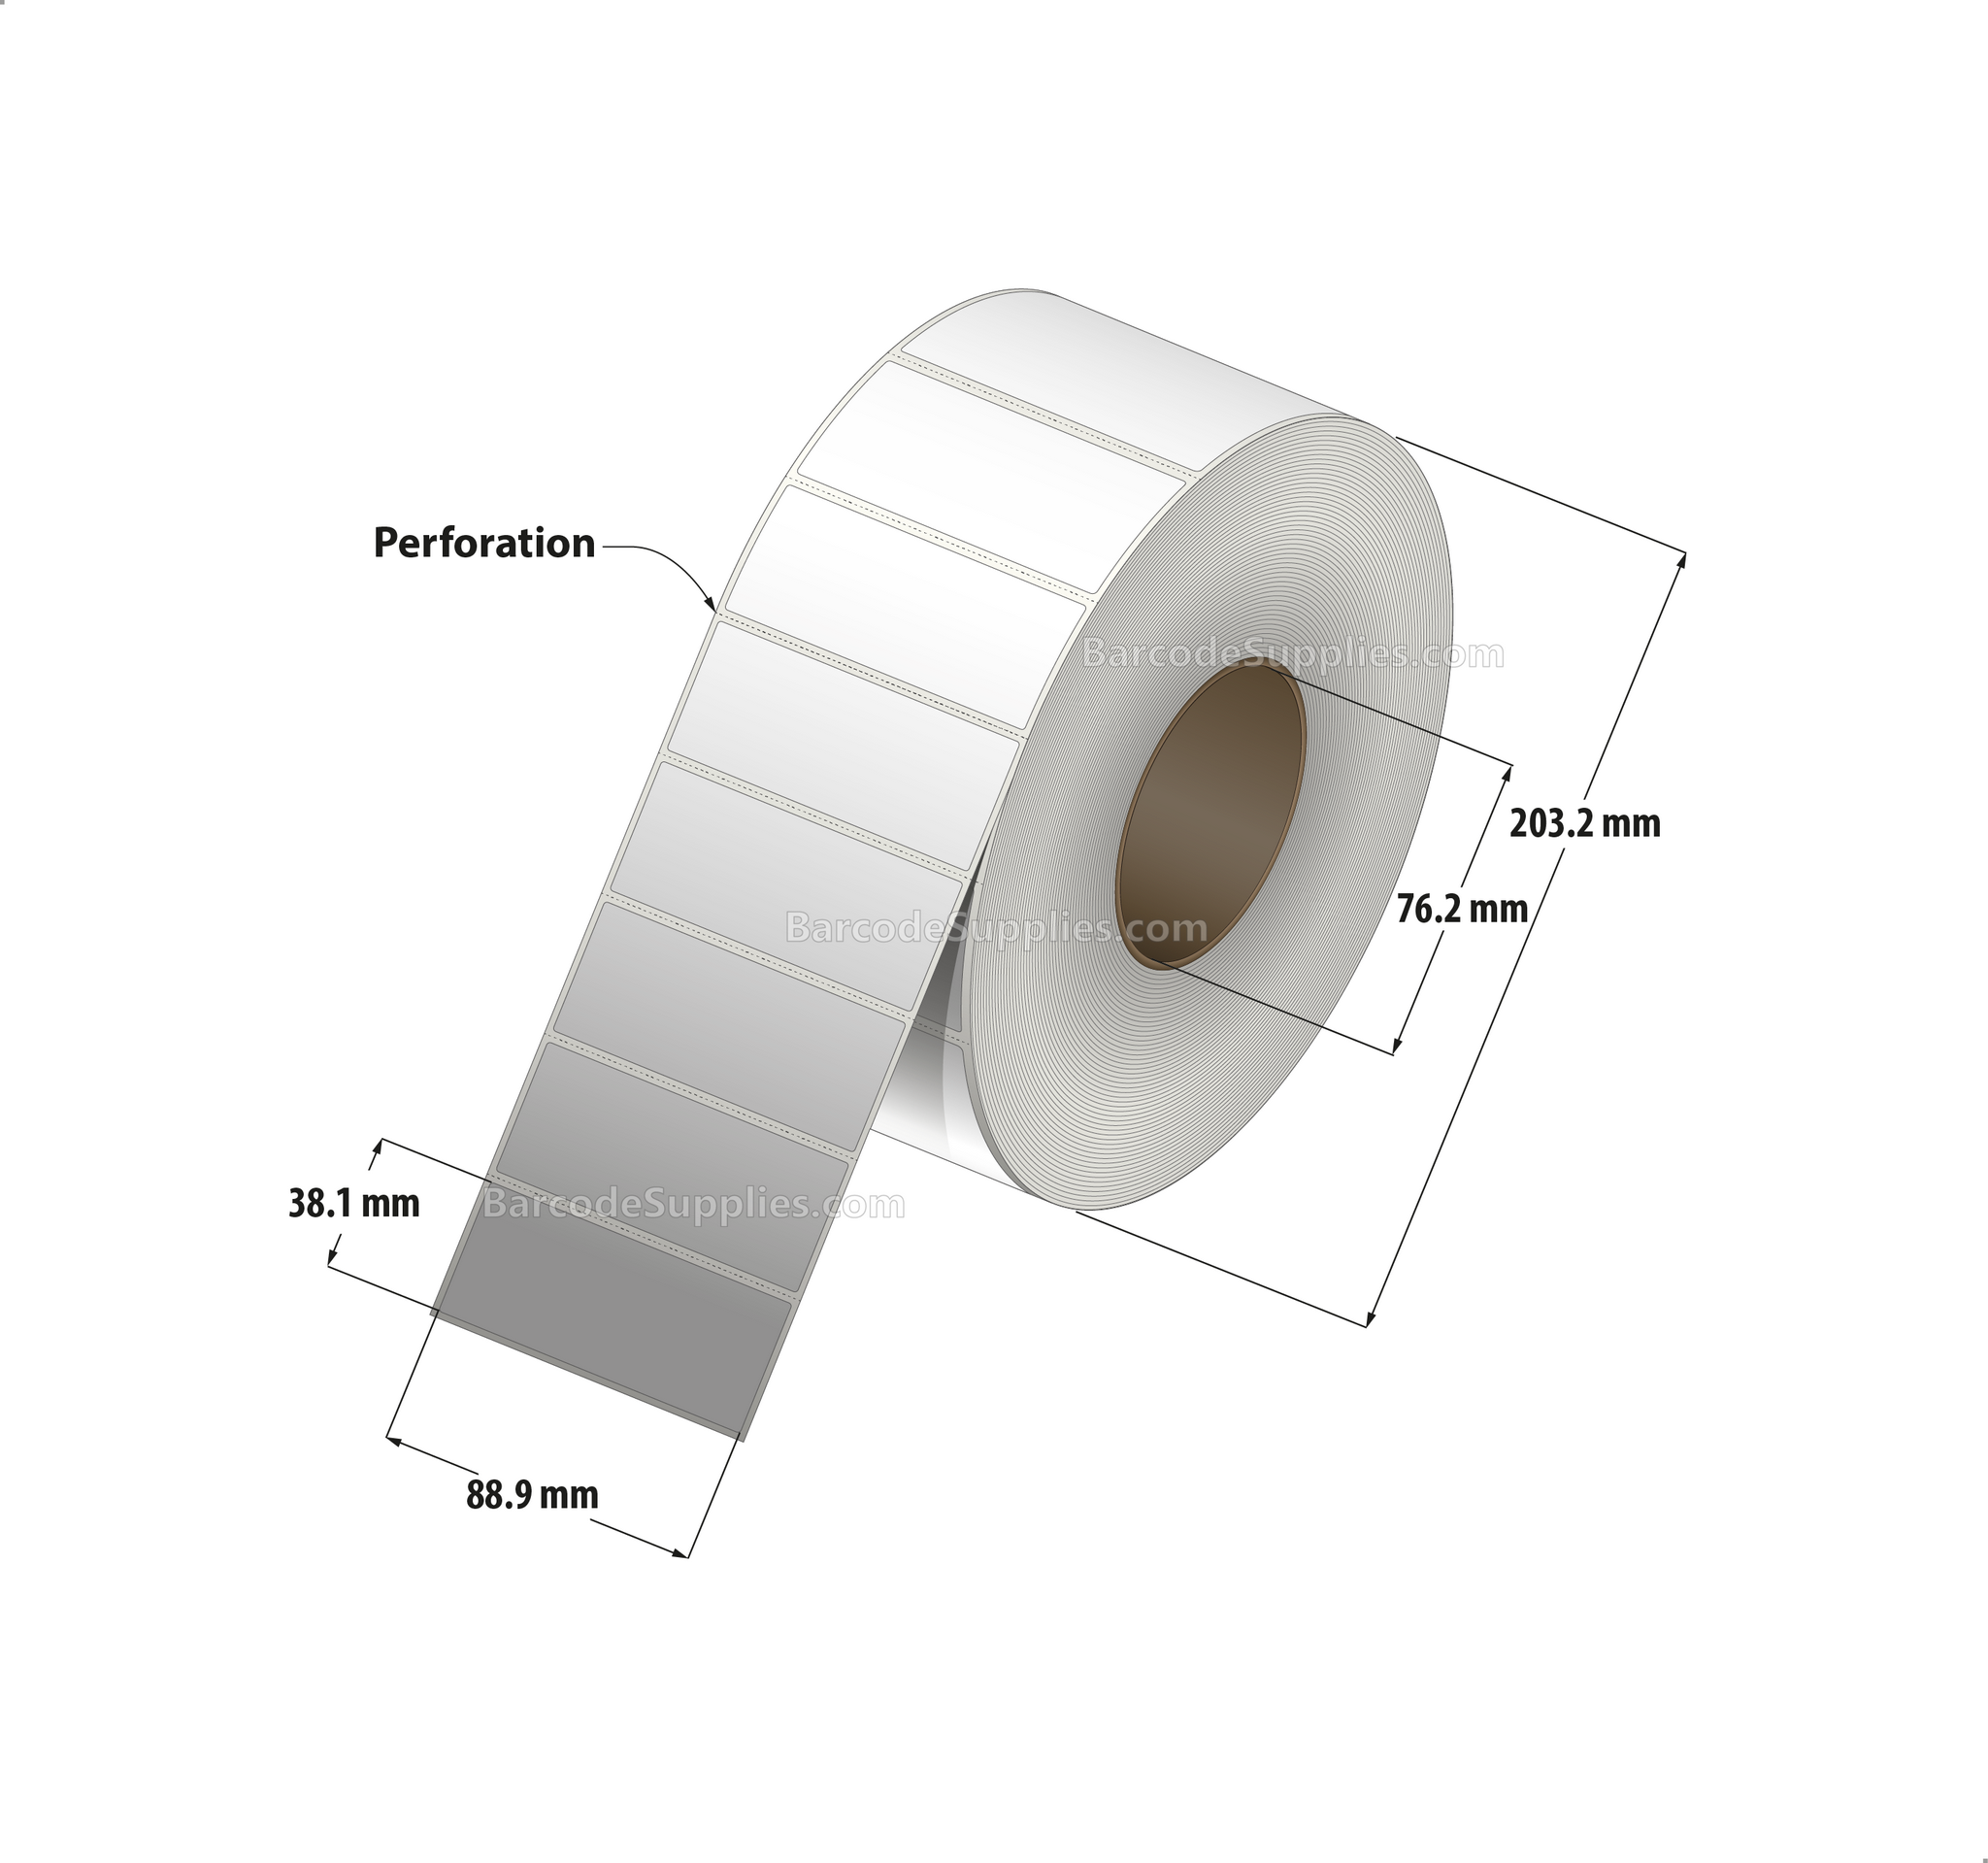 3.5 x 1.5 Thermal Transfer White Labels With Removable Adhesive - Perforated - 3600 Labels Per Roll - Carton Of 4 Rolls - 14400 Labels Total - MPN: RE-35-15-3600-3